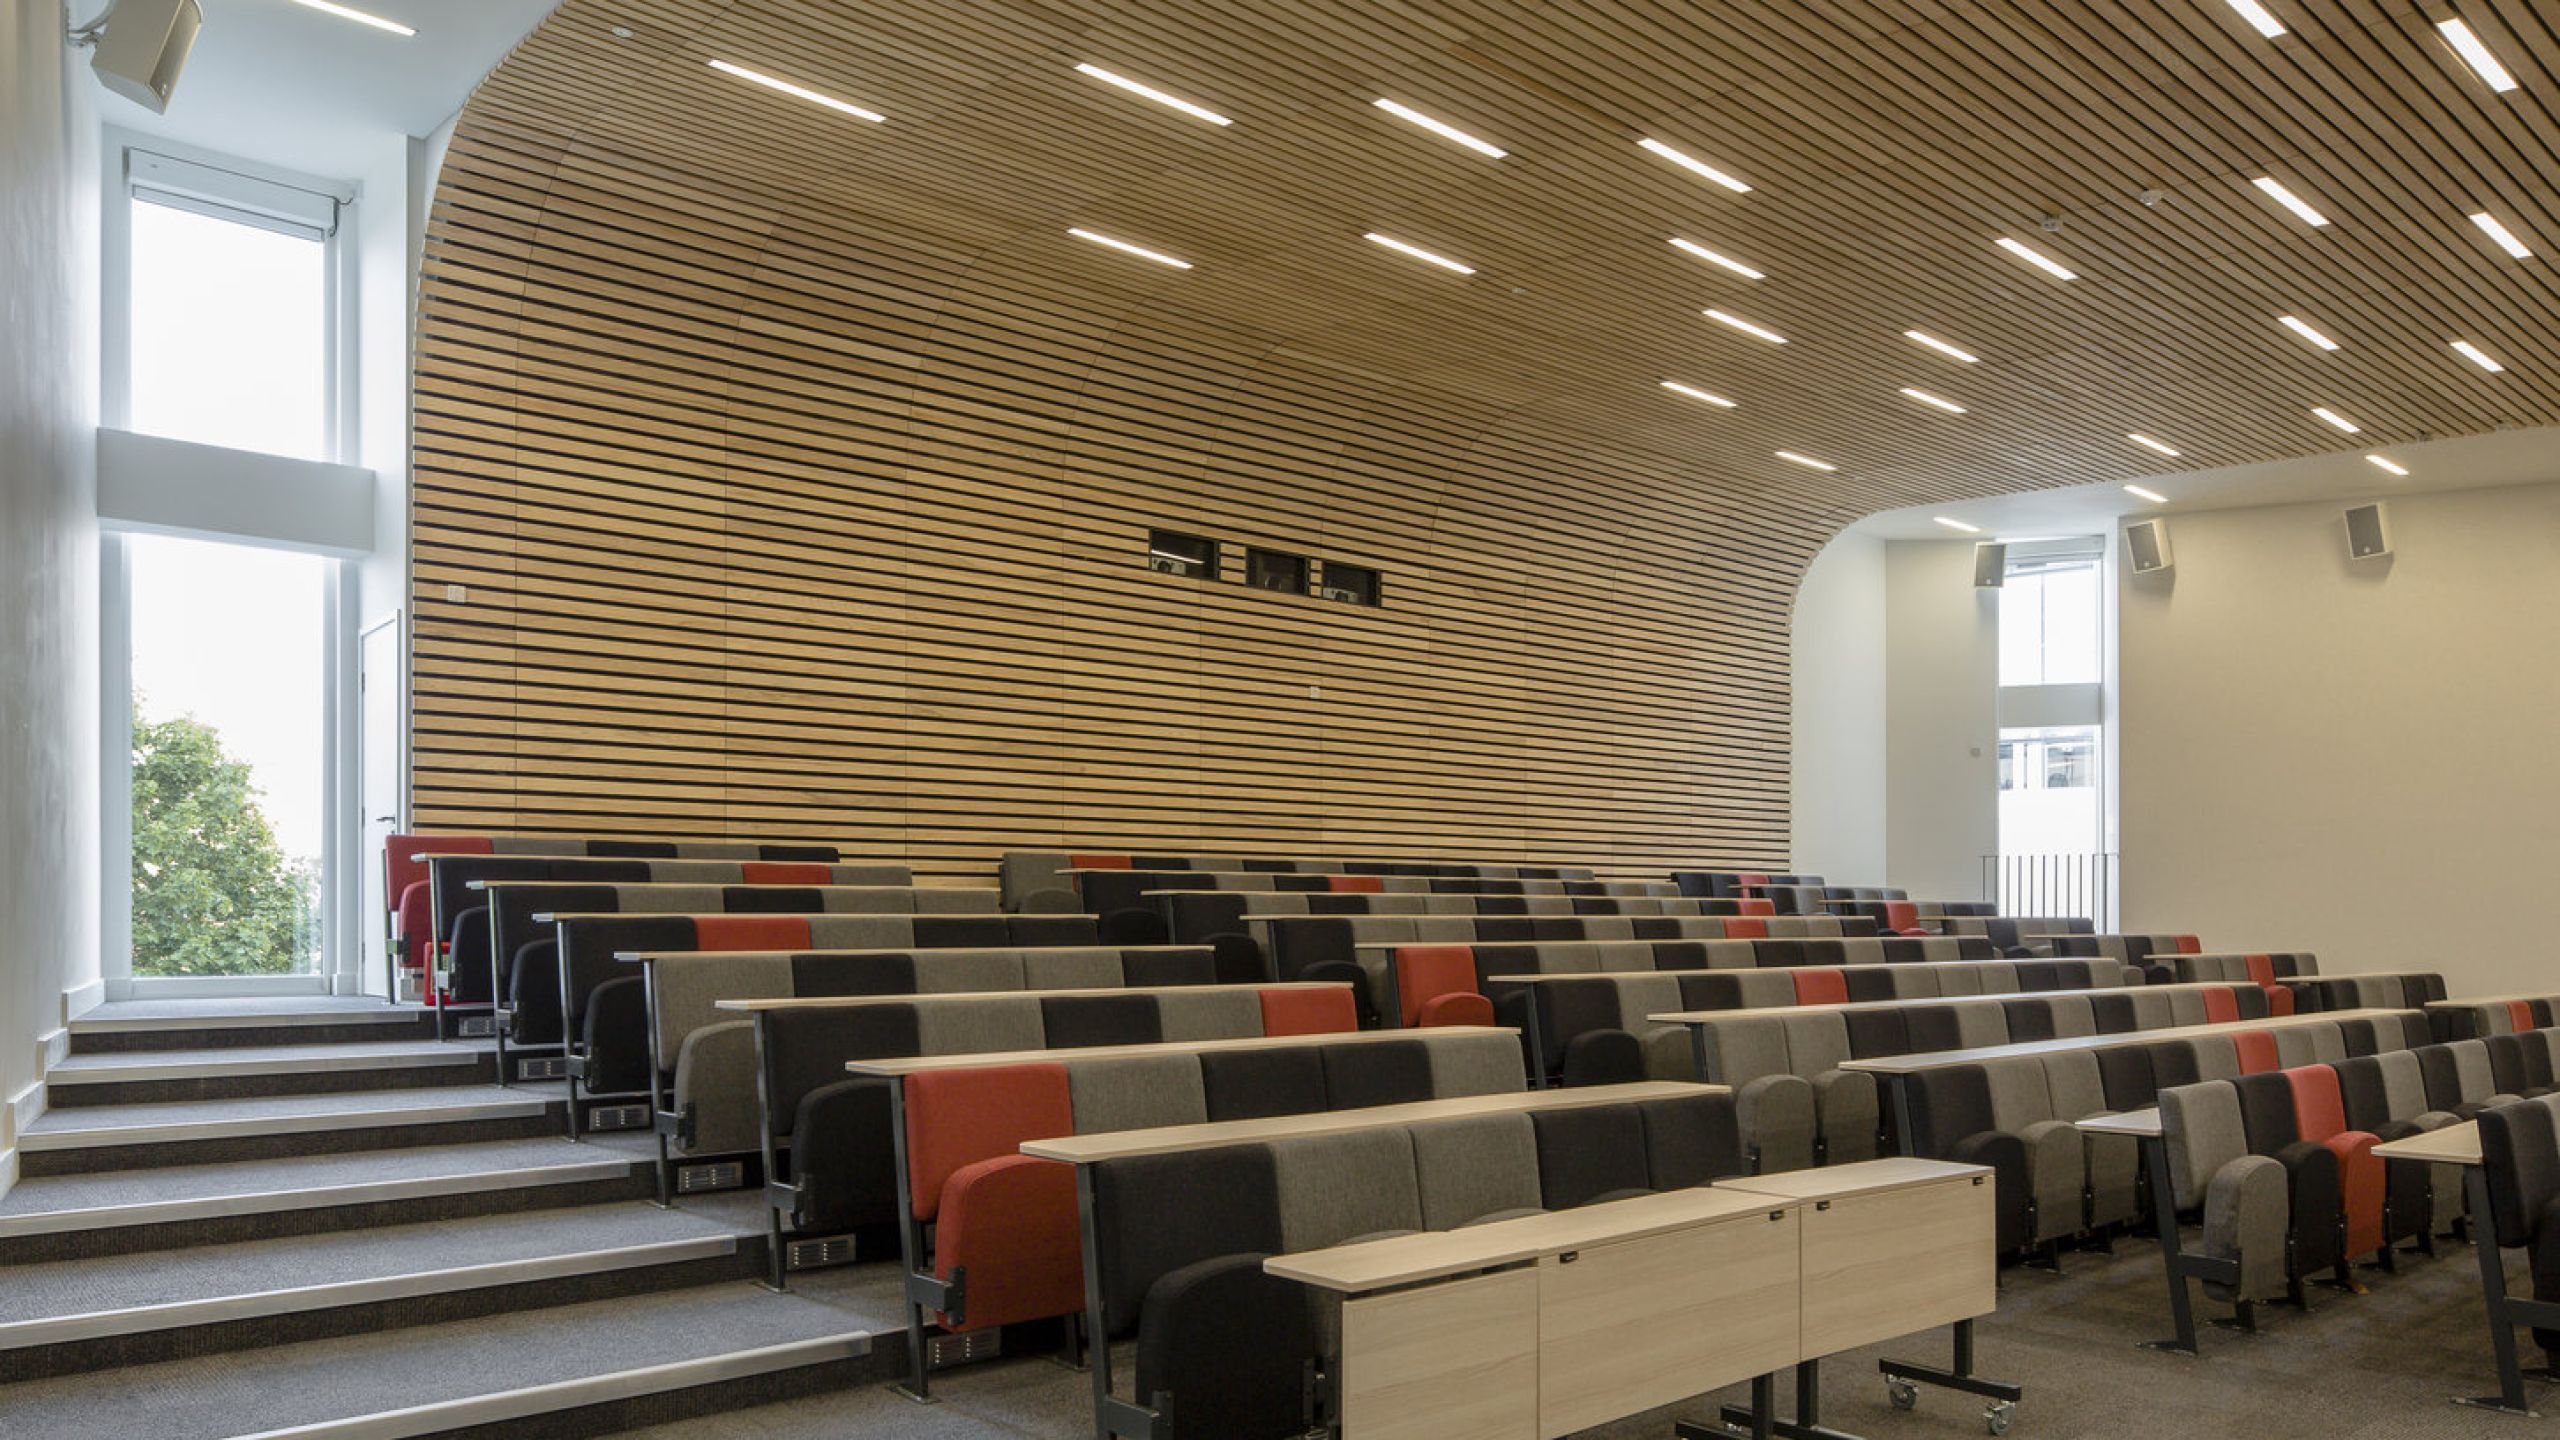 Timber slatted ceilings at Eldon Campus, Portsmouth University